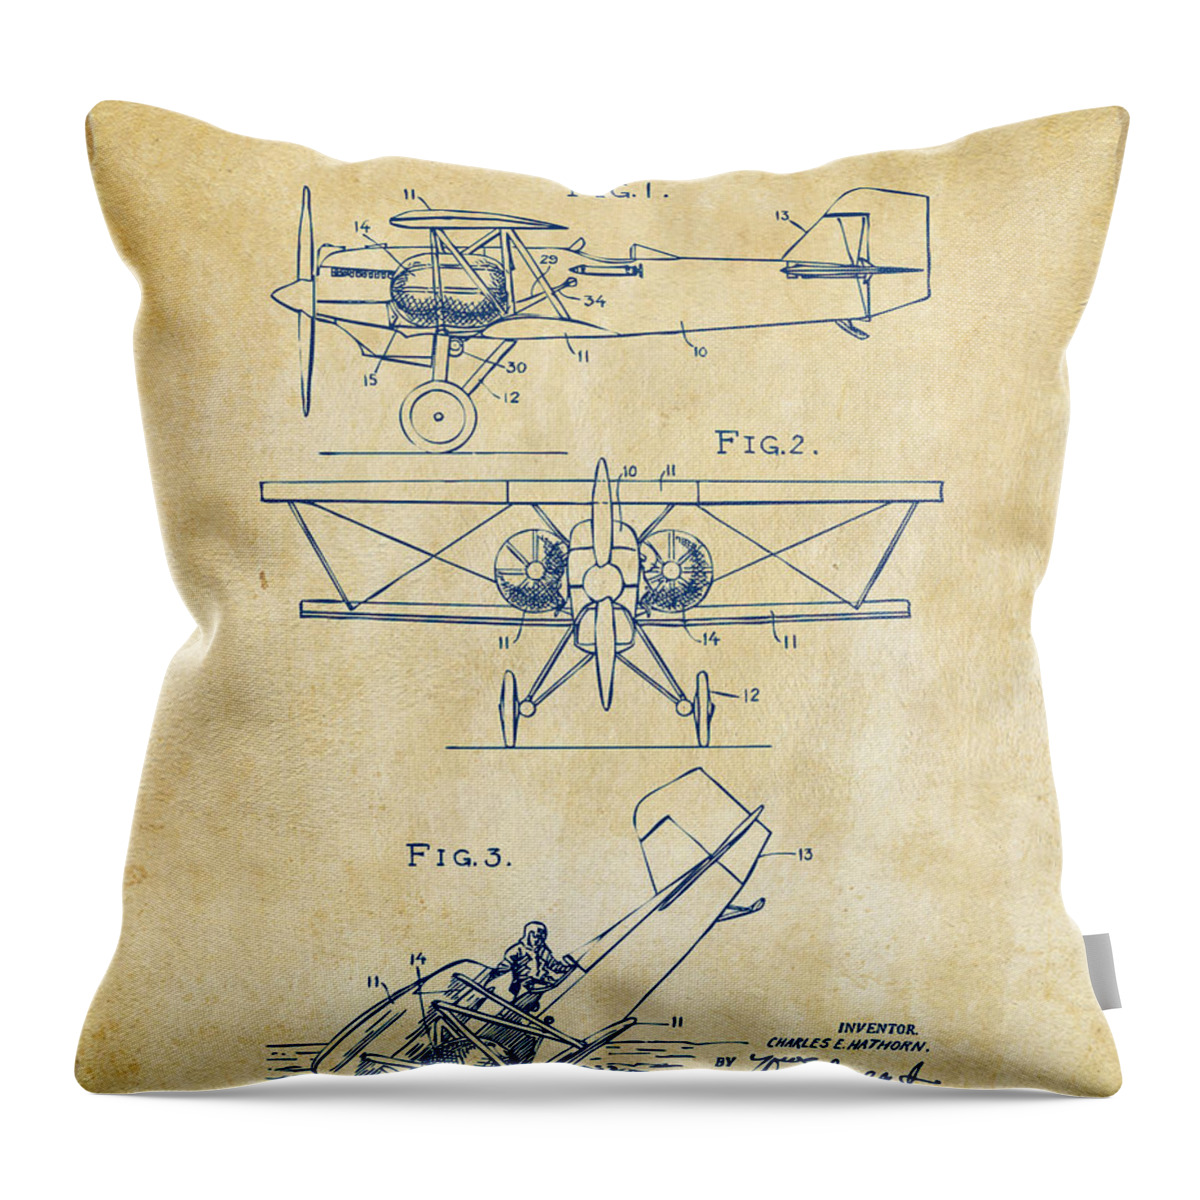 Aircraft Throw Pillow featuring the digital art 1931 Aircraft Emergency Floatation Patent Vintage by Nikki Marie Smith